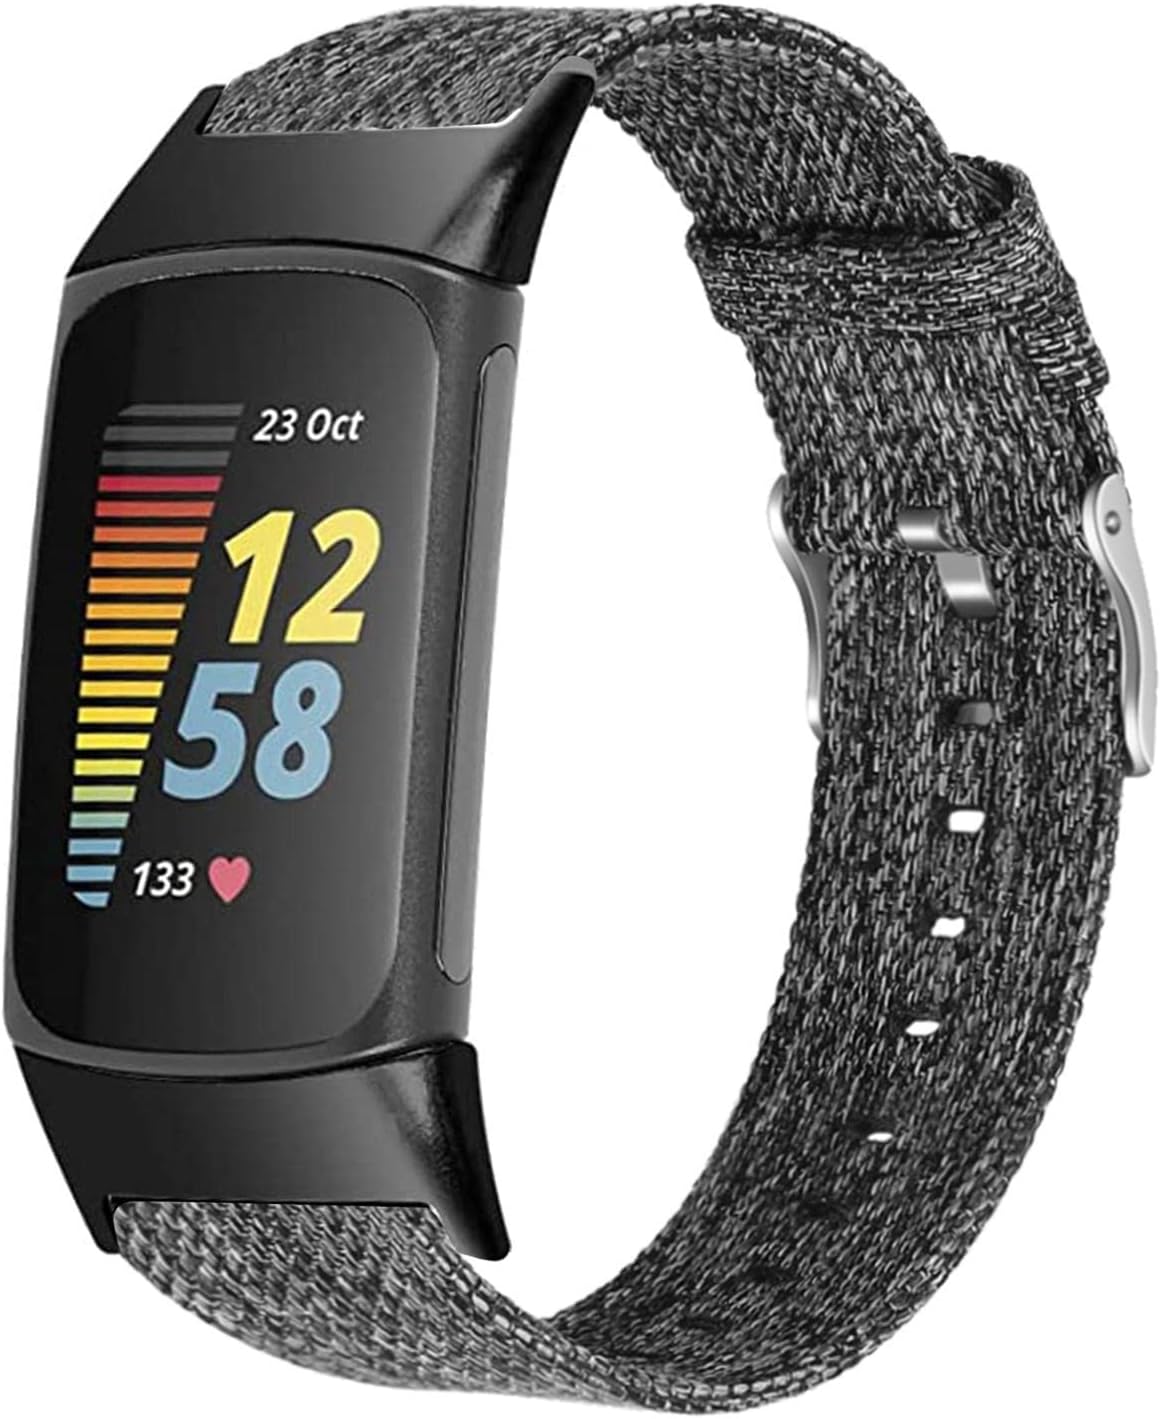 Abanen Women and Men Band for Fitbit Charge 6 / Charge 5, Soft Woven Canvas Nylon Quick Dry Wrist Strap for Fitbit Charge 5